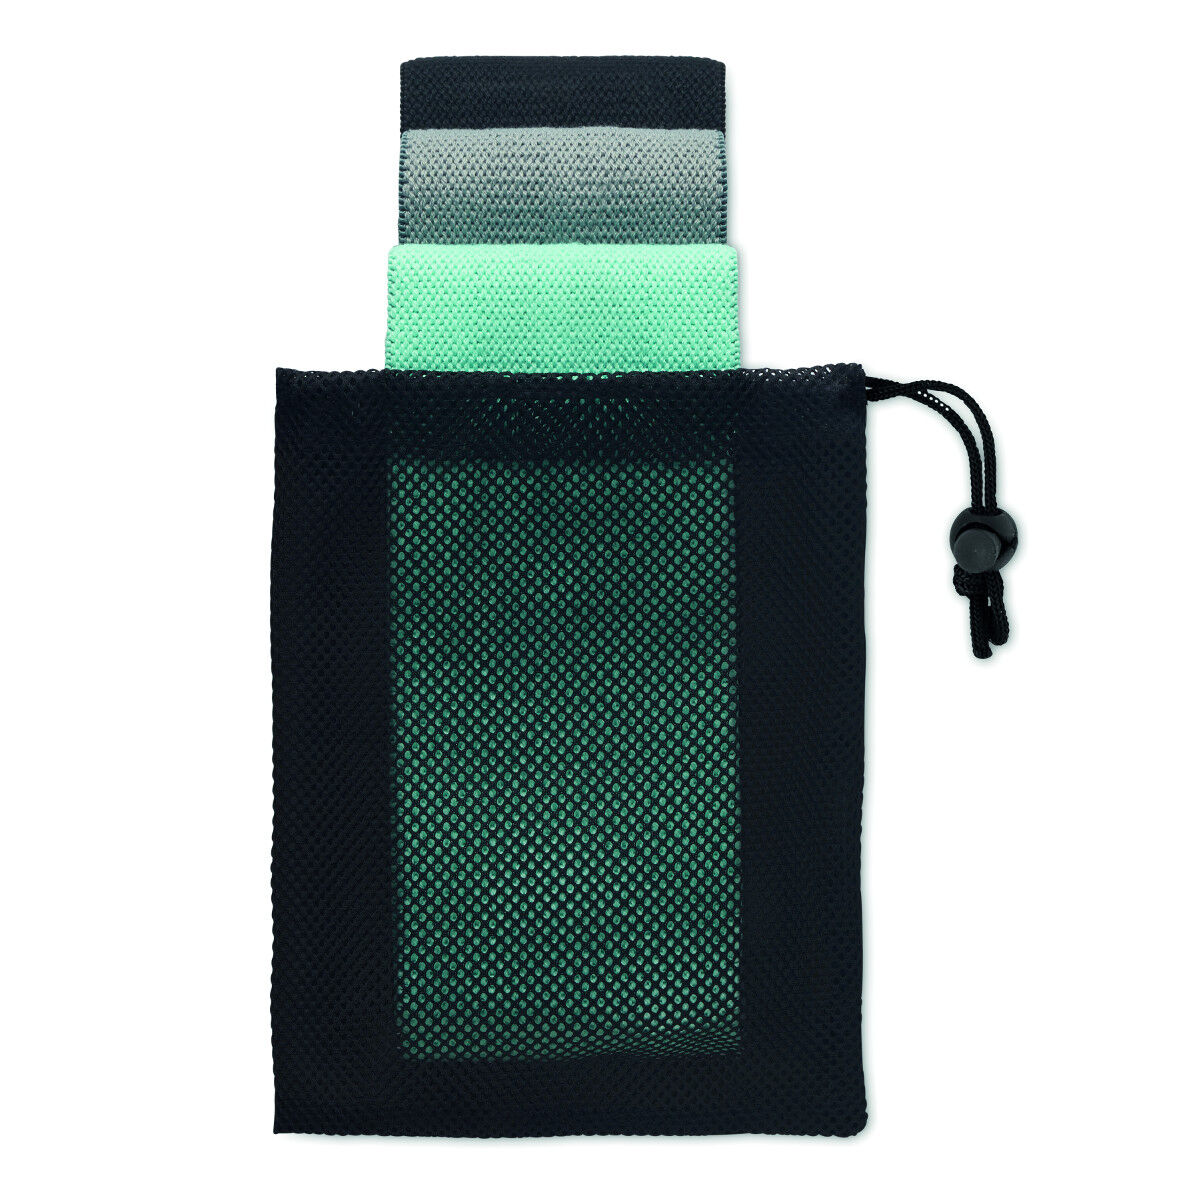 Set of Resistance Bands in a pouch